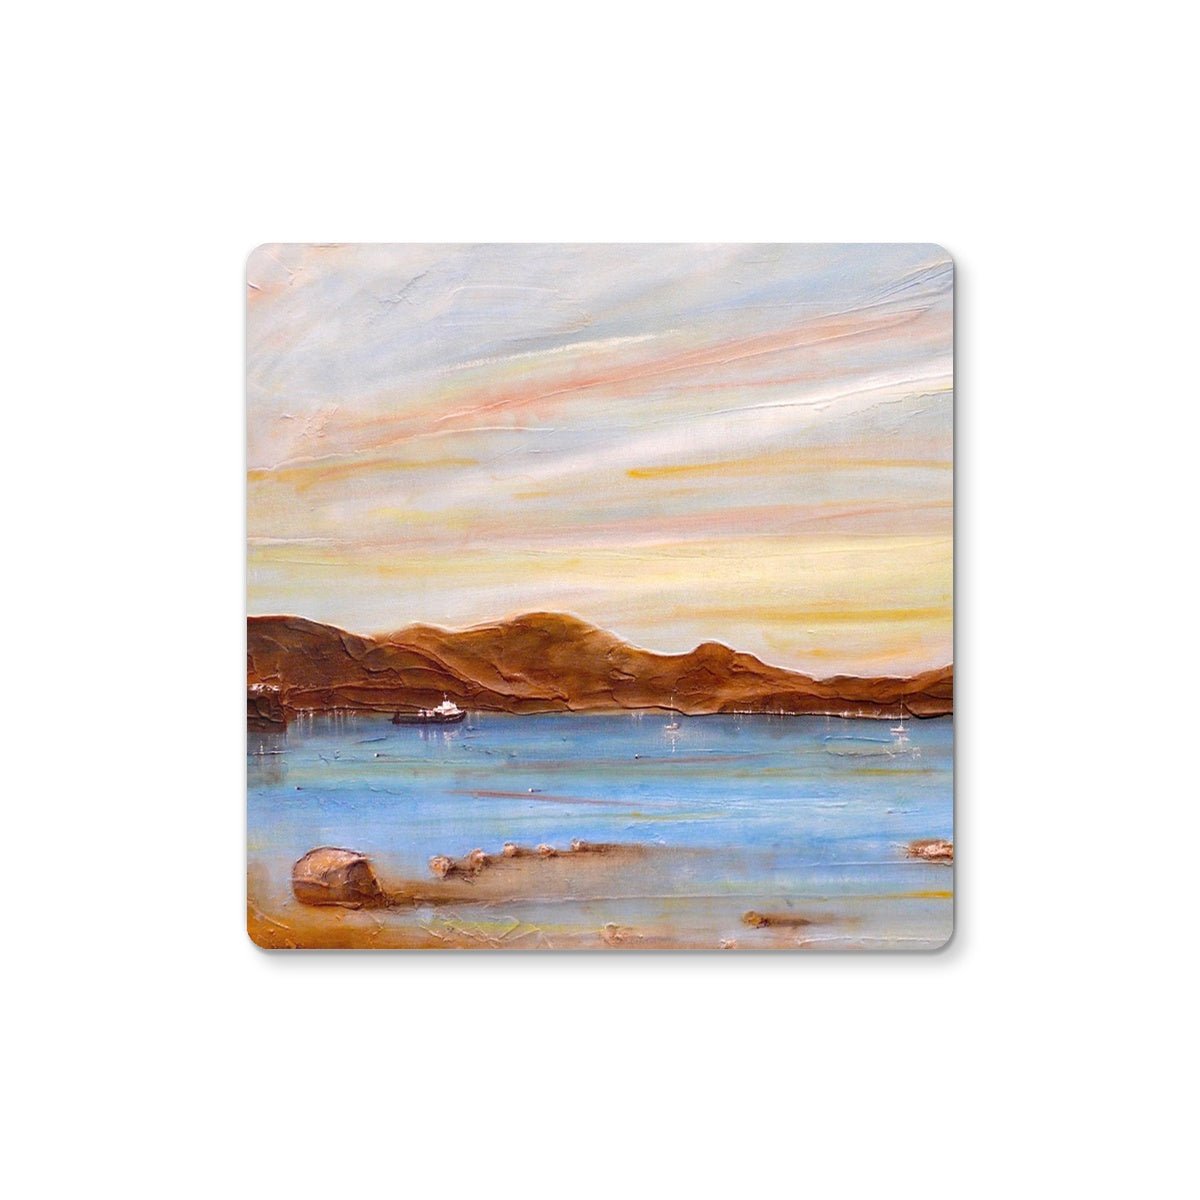 The Last Ferry To Dunoon Art Gifts Coaster-Coasters-River Clyde Art Gallery-6 Coasters-Paintings, Prints, Homeware, Art Gifts From Scotland By Scottish Artist Kevin Hunter